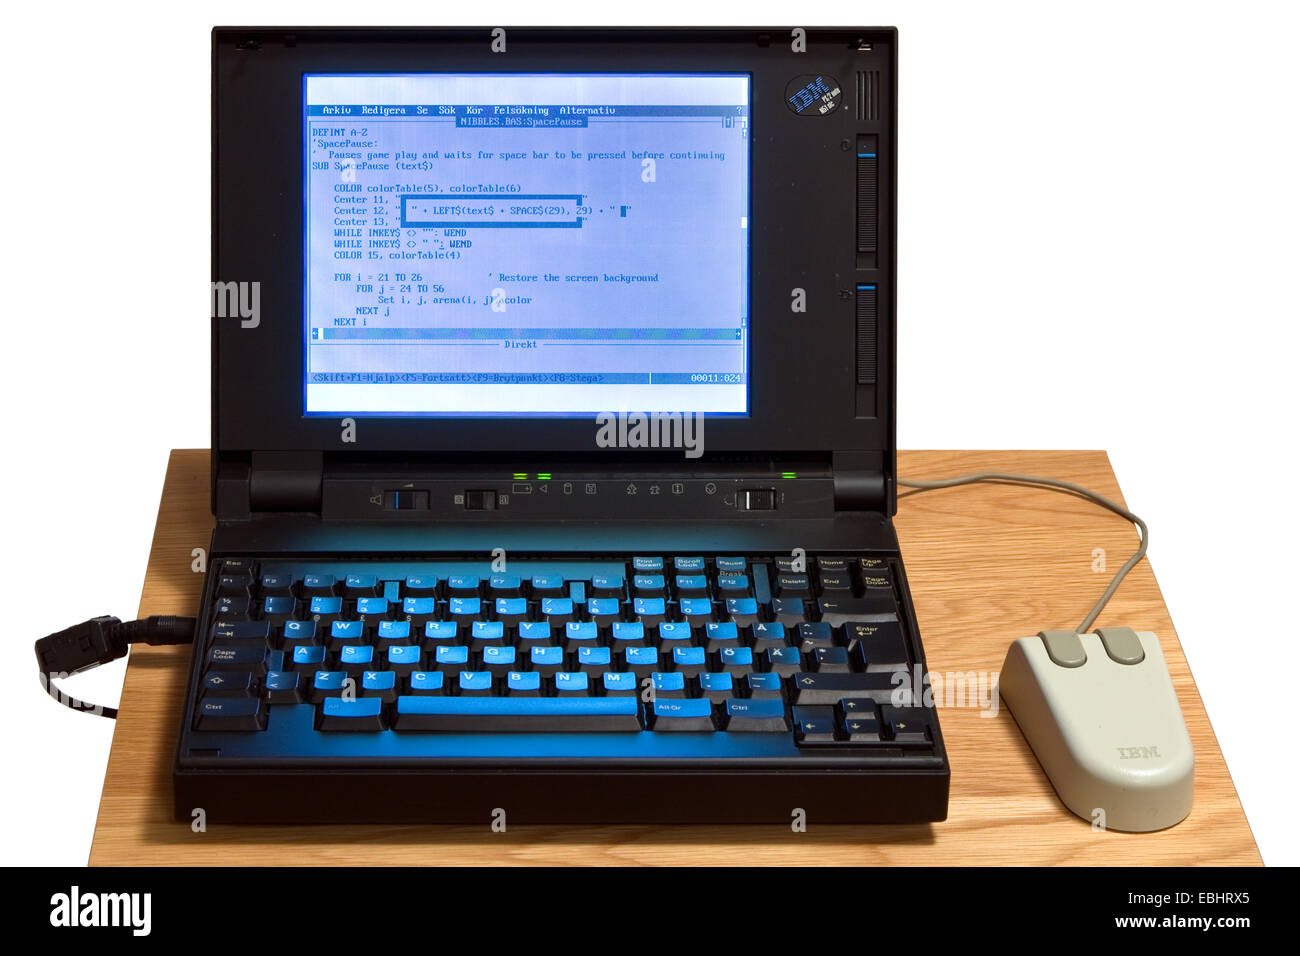 An IBM notebook from the early 1990s showing the BASIC programming language  Stock Photo - Alamy